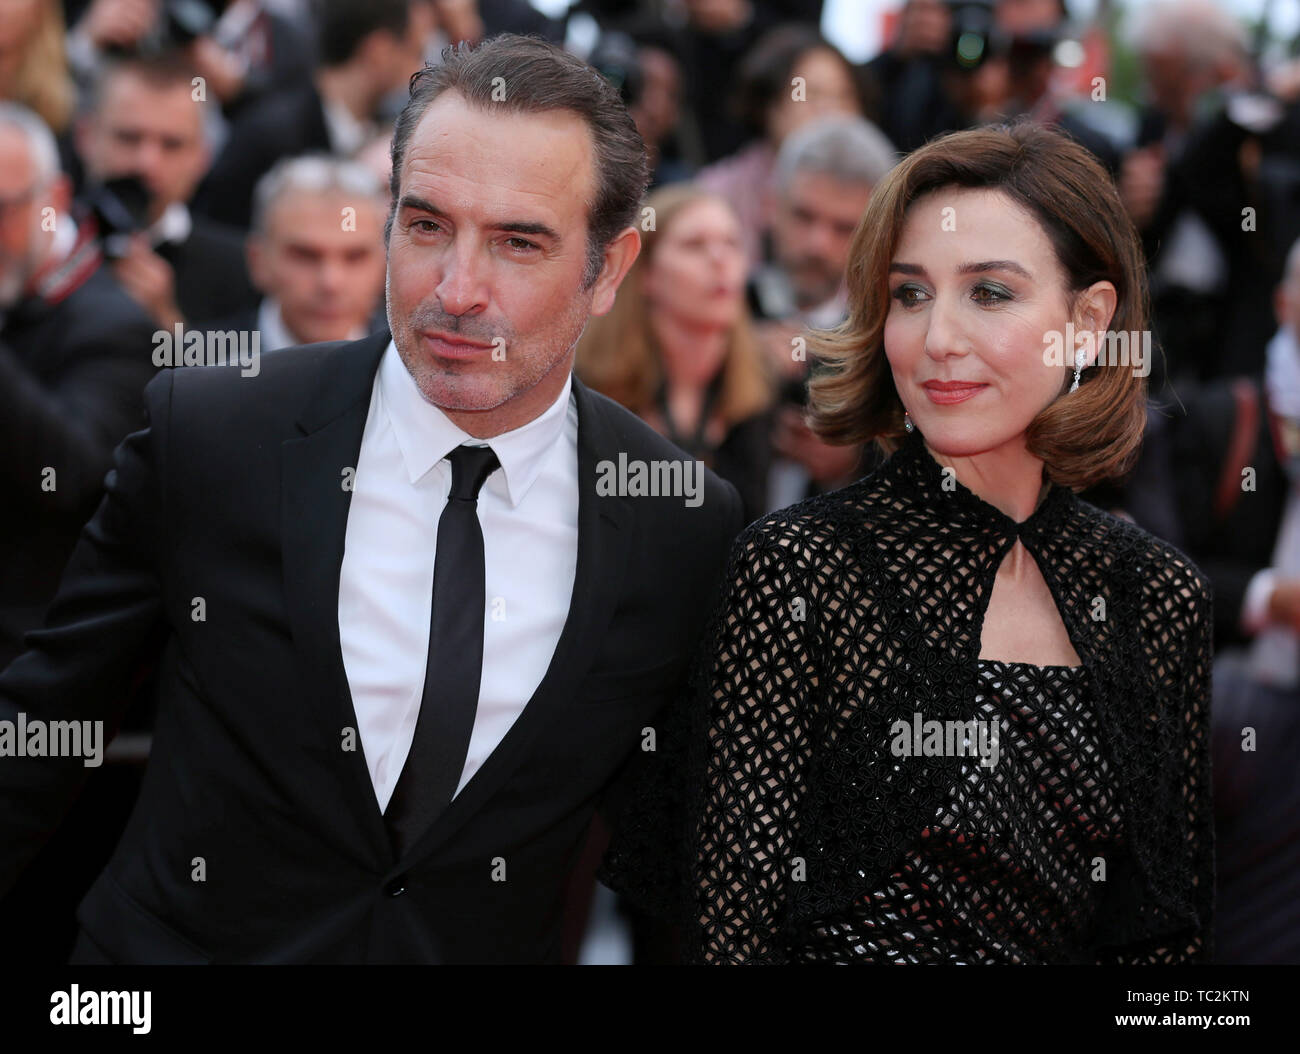 CANNES, FRANCE - MAY 18: Jean Dujardin and Elsa Zylberstein attend the screening of 'Les Plus Belles Annees d'une Vie' during the 72nd Cannes Film Fes Stock Photo